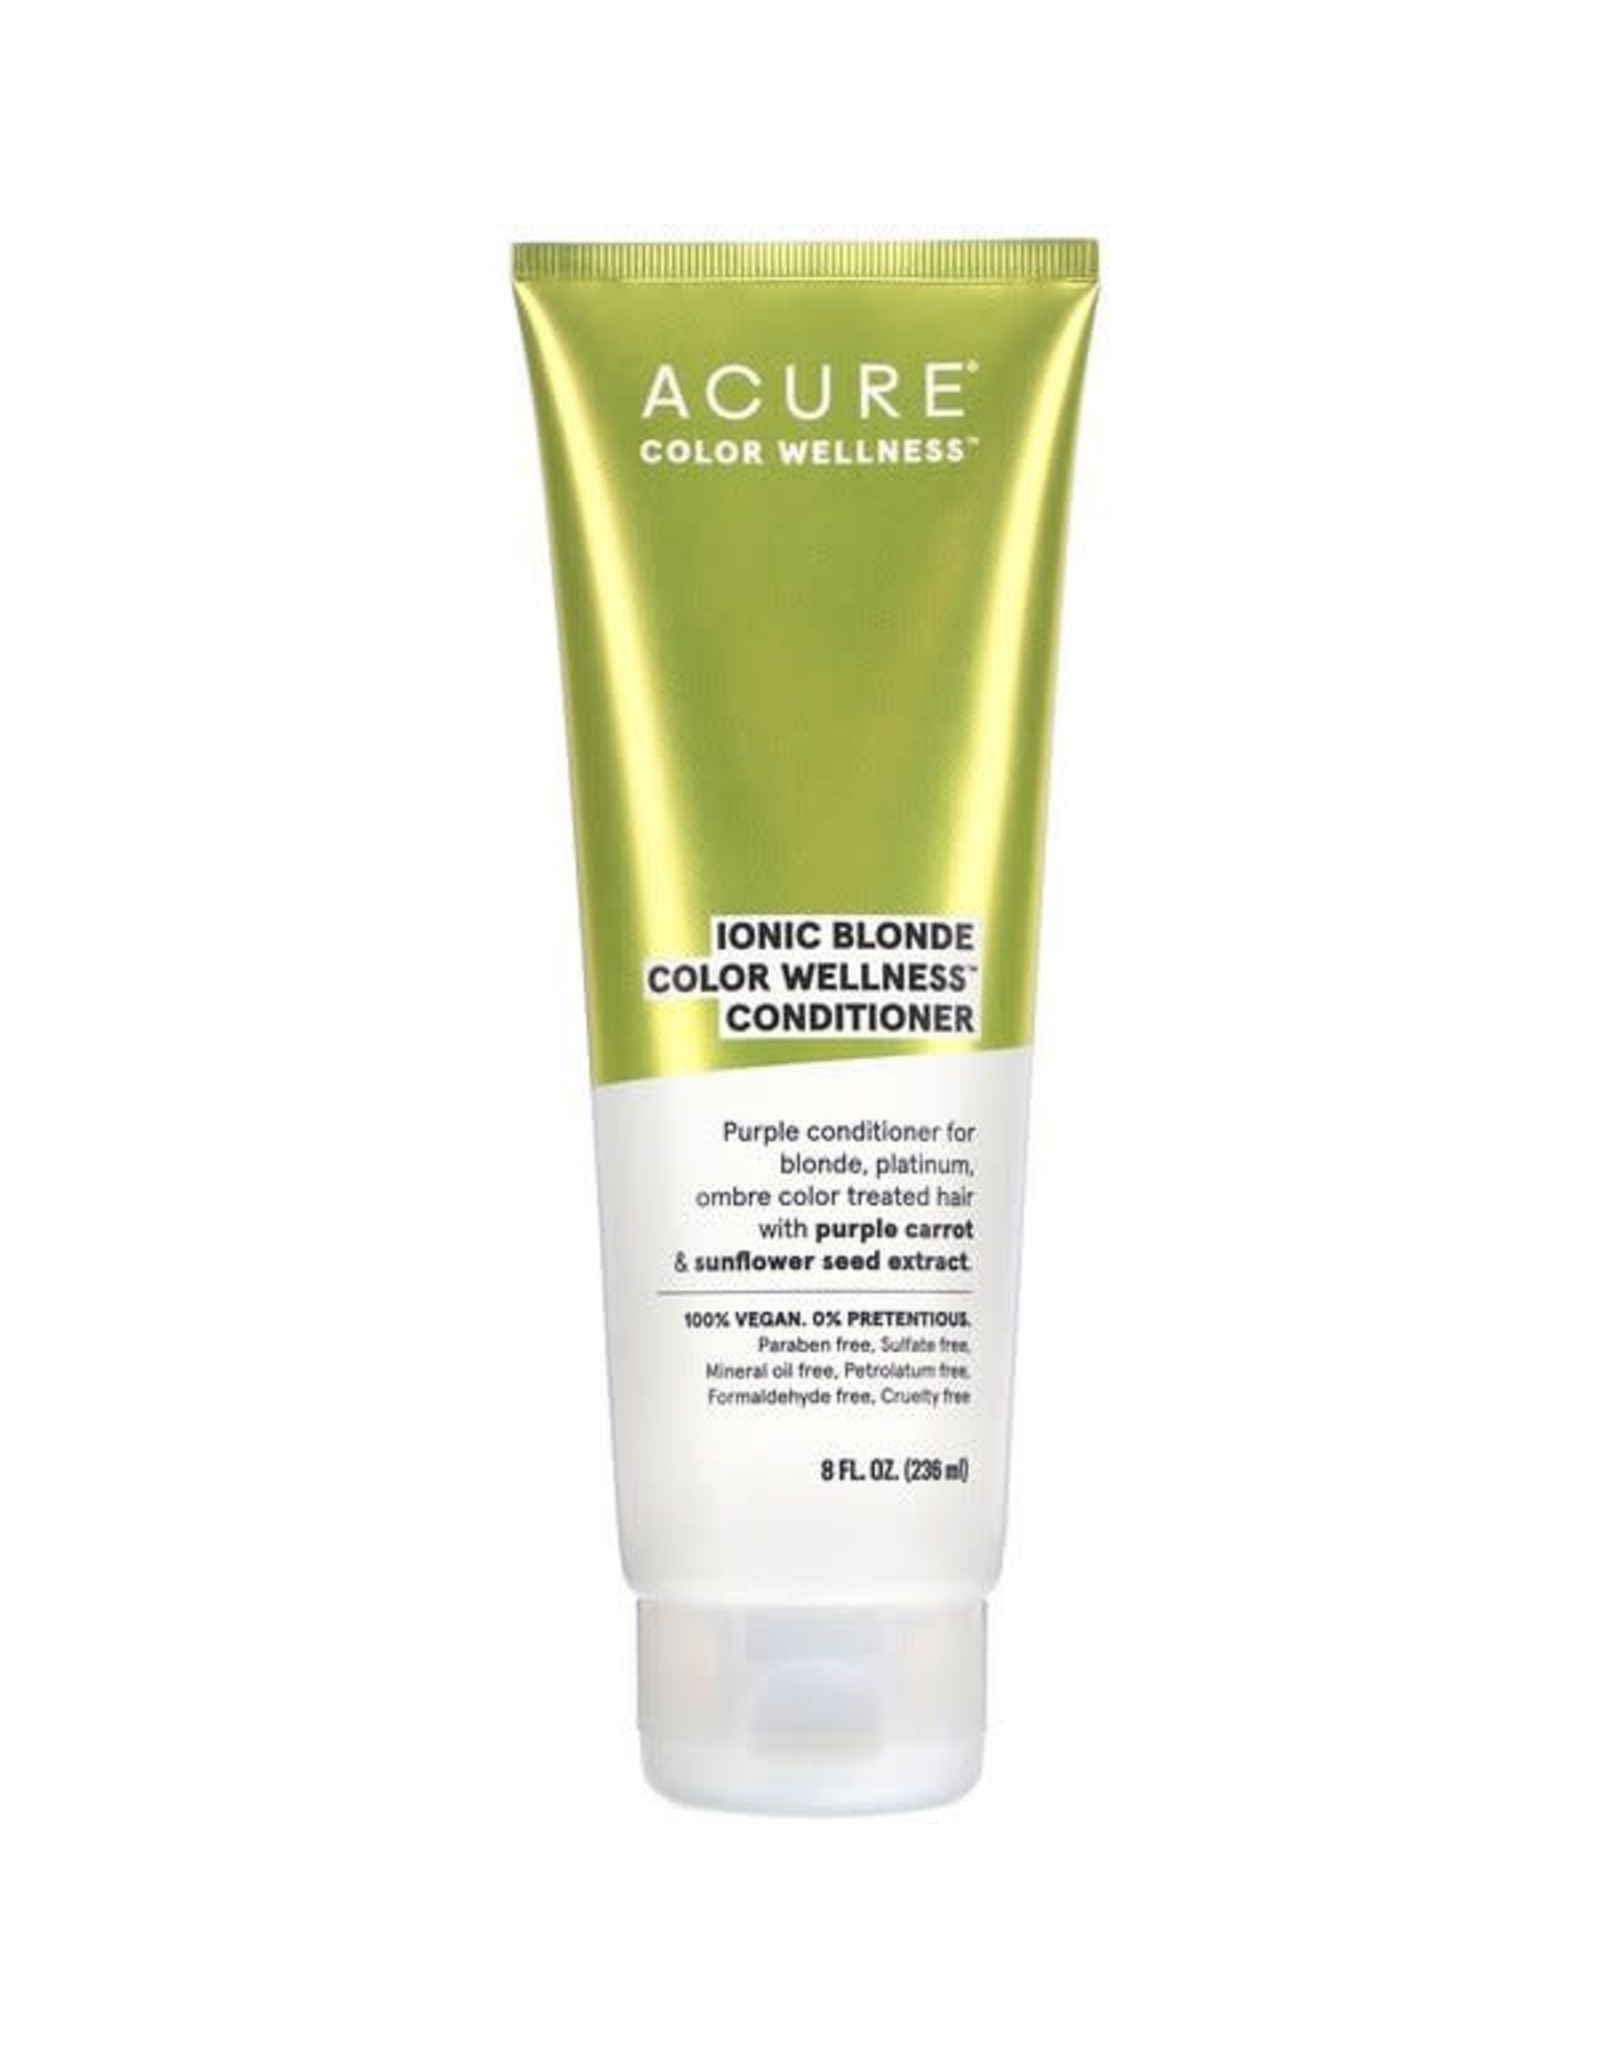 Acure Ionic Blonde Colour Wellness Conditioner 236ml